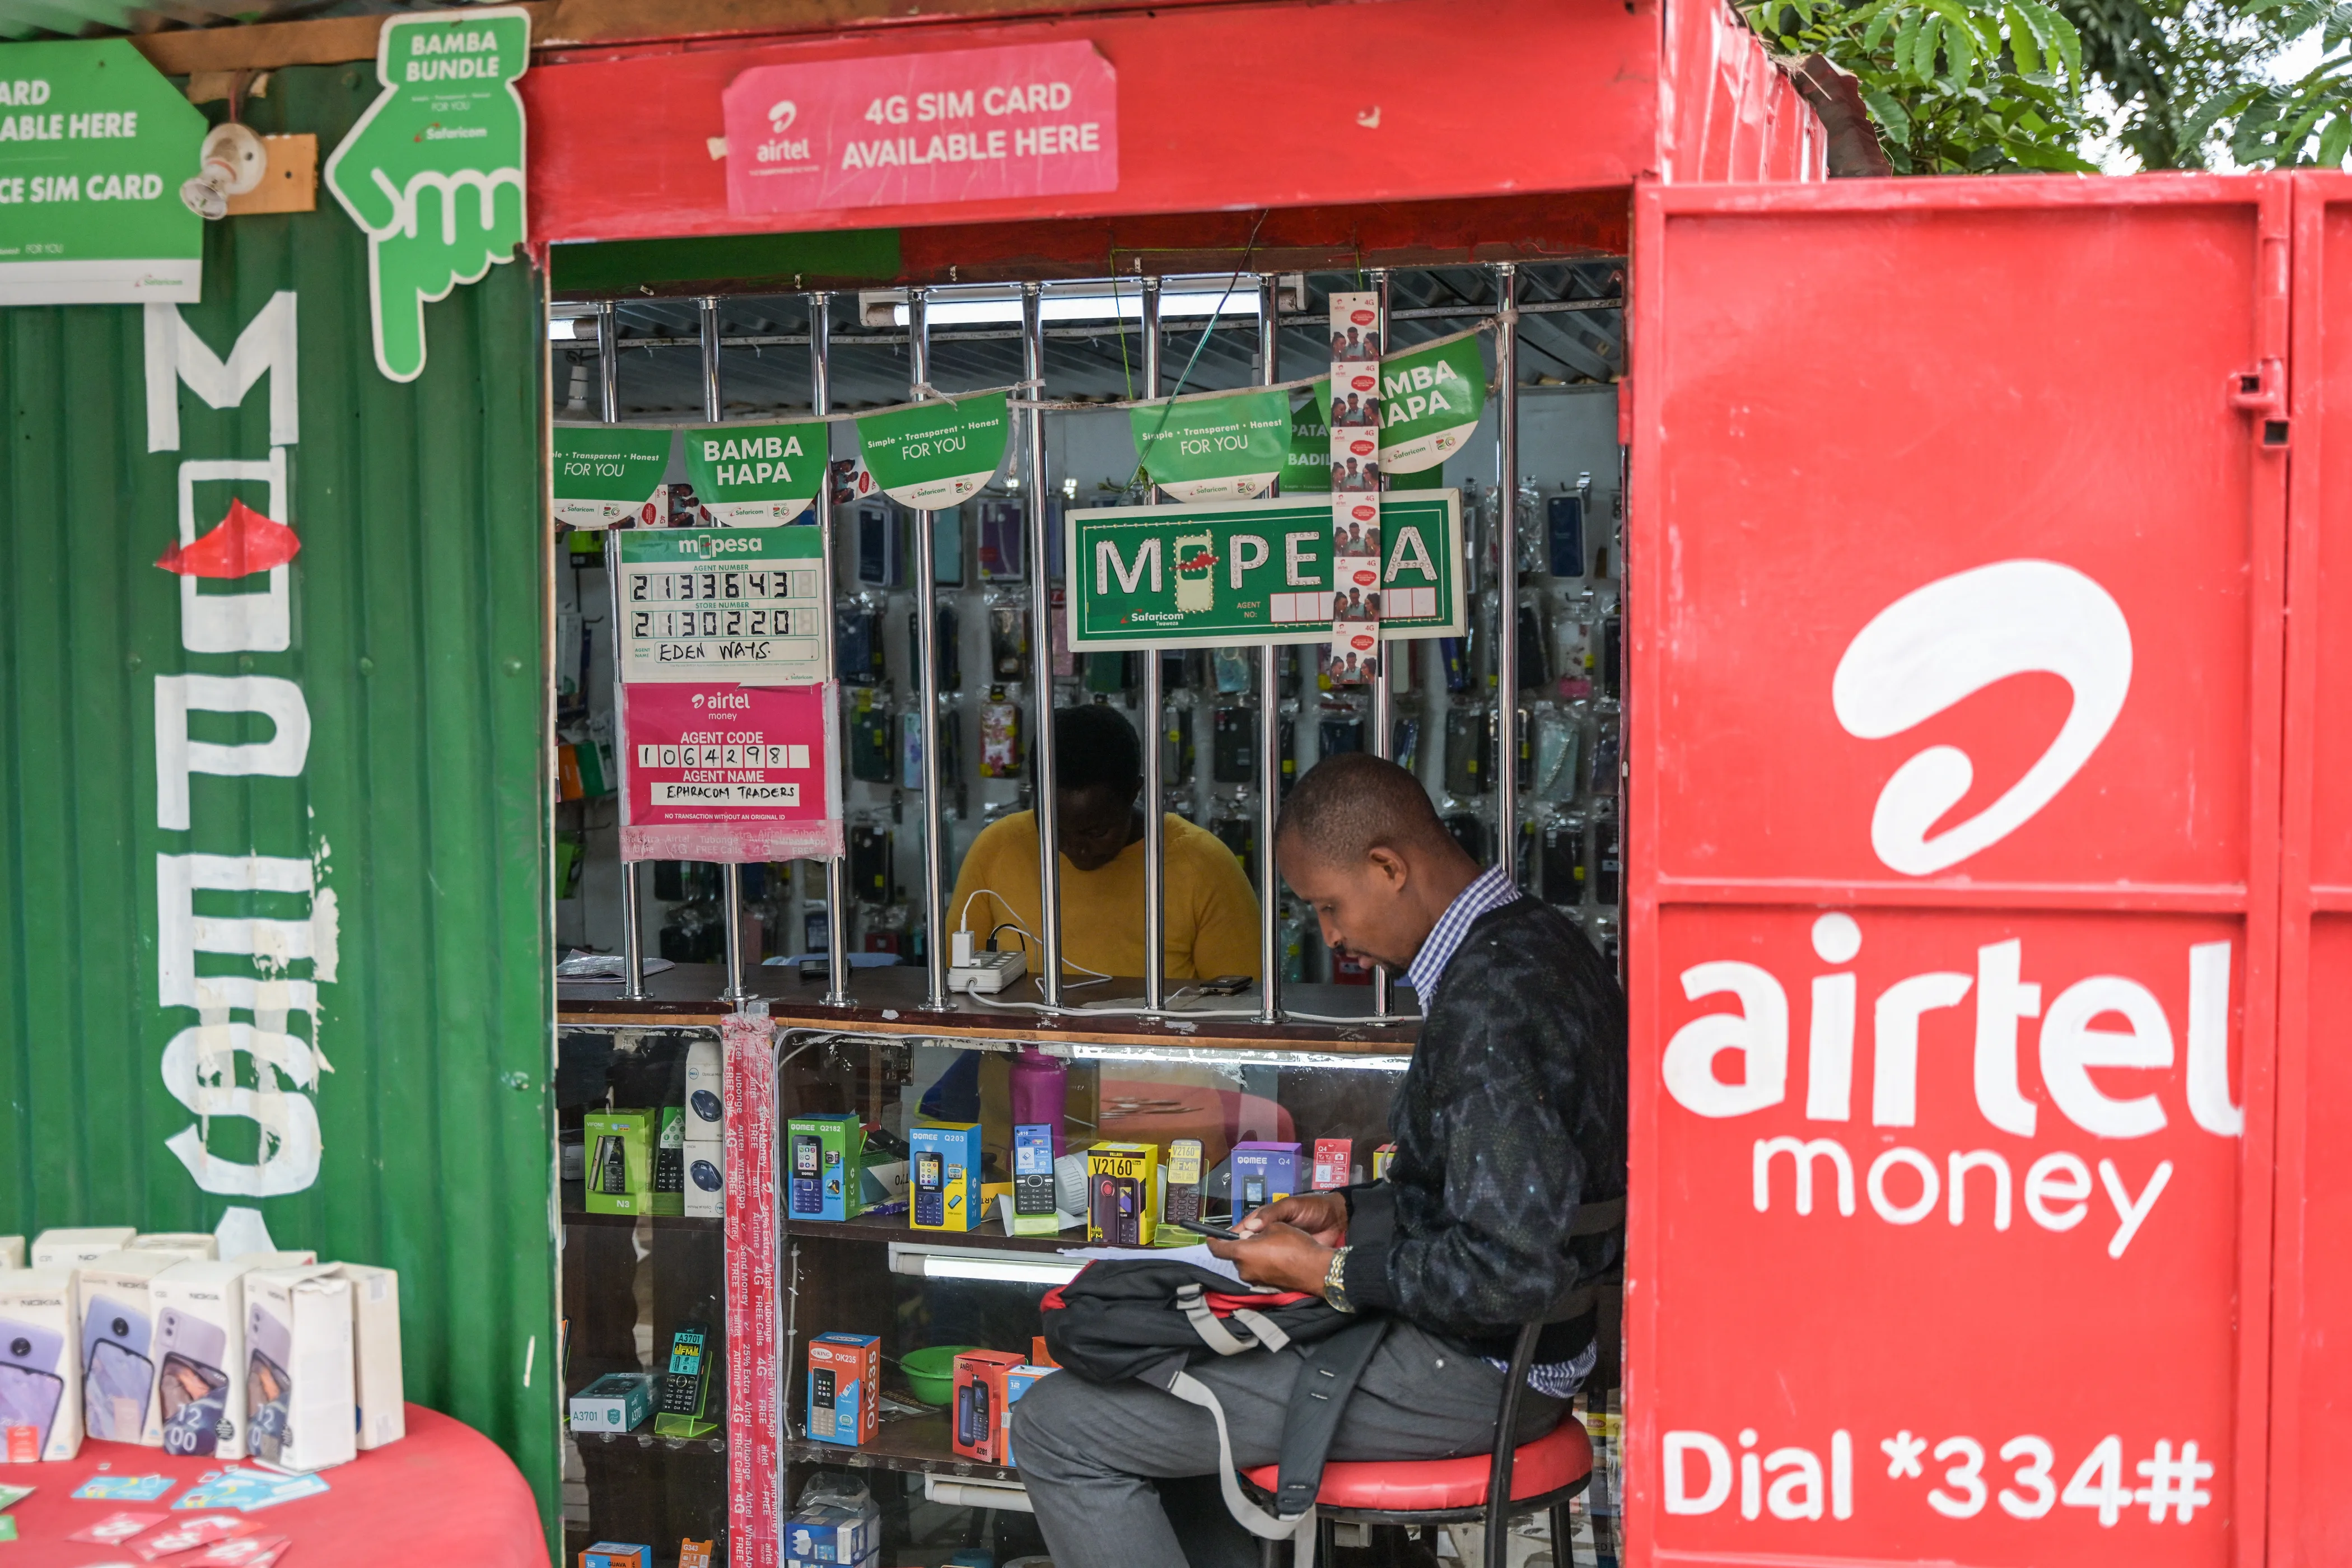 Mobile money leaders say political will needed to fix cross-border payments